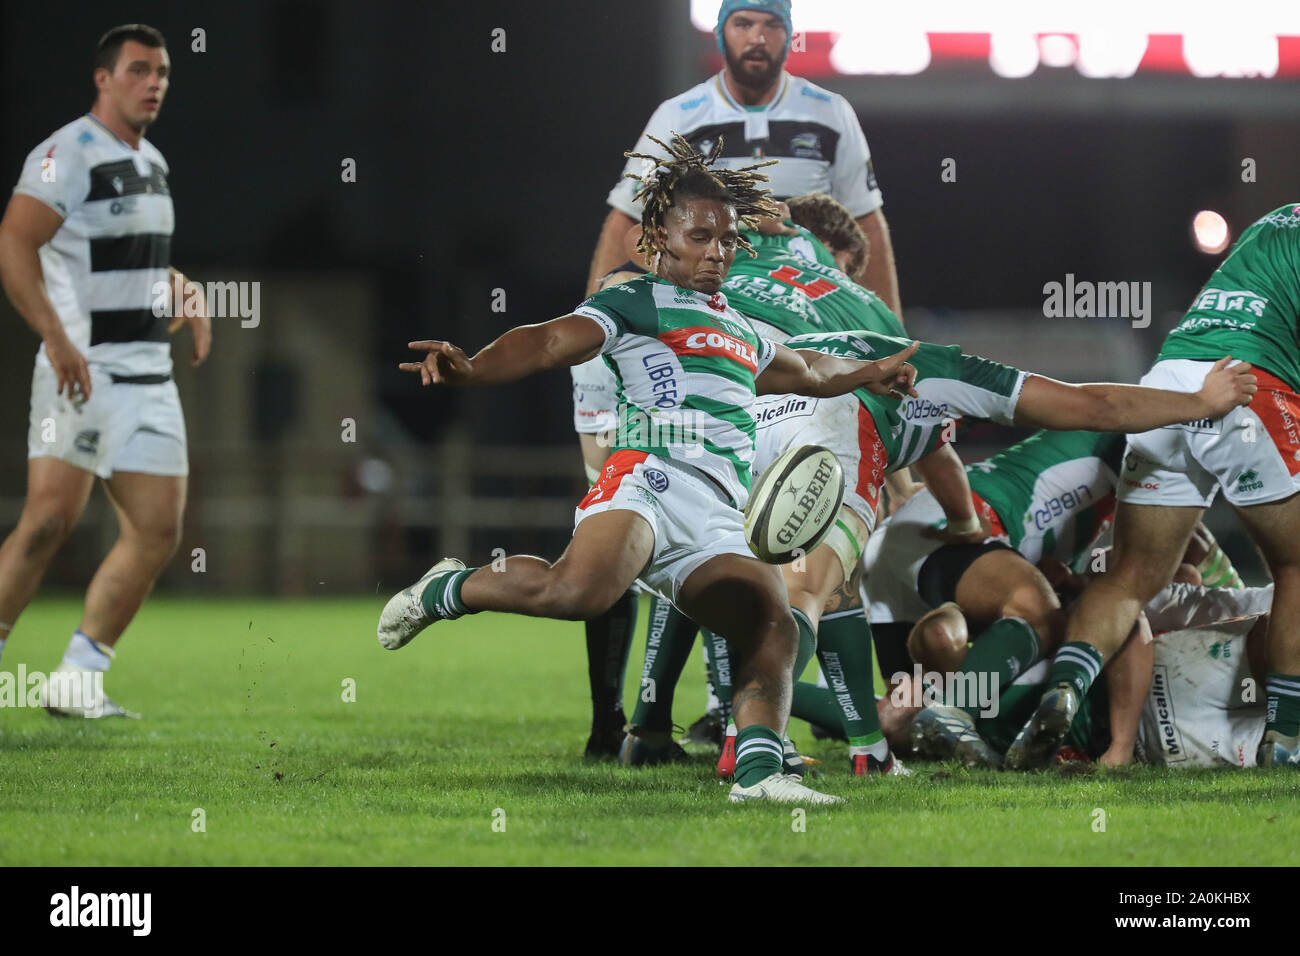 Parma, Italy, 20 Sep 2019, KIERAN CROWLEY AND MICHAEL BRADLEY PRIMA OF  MATCH during Test Match 2019 - Zebre Rugby Vs Benetton Treviso - Rugby  Guinness Pro 14 - Credit: LPS/Massimiliano Carnabuci/Alamy